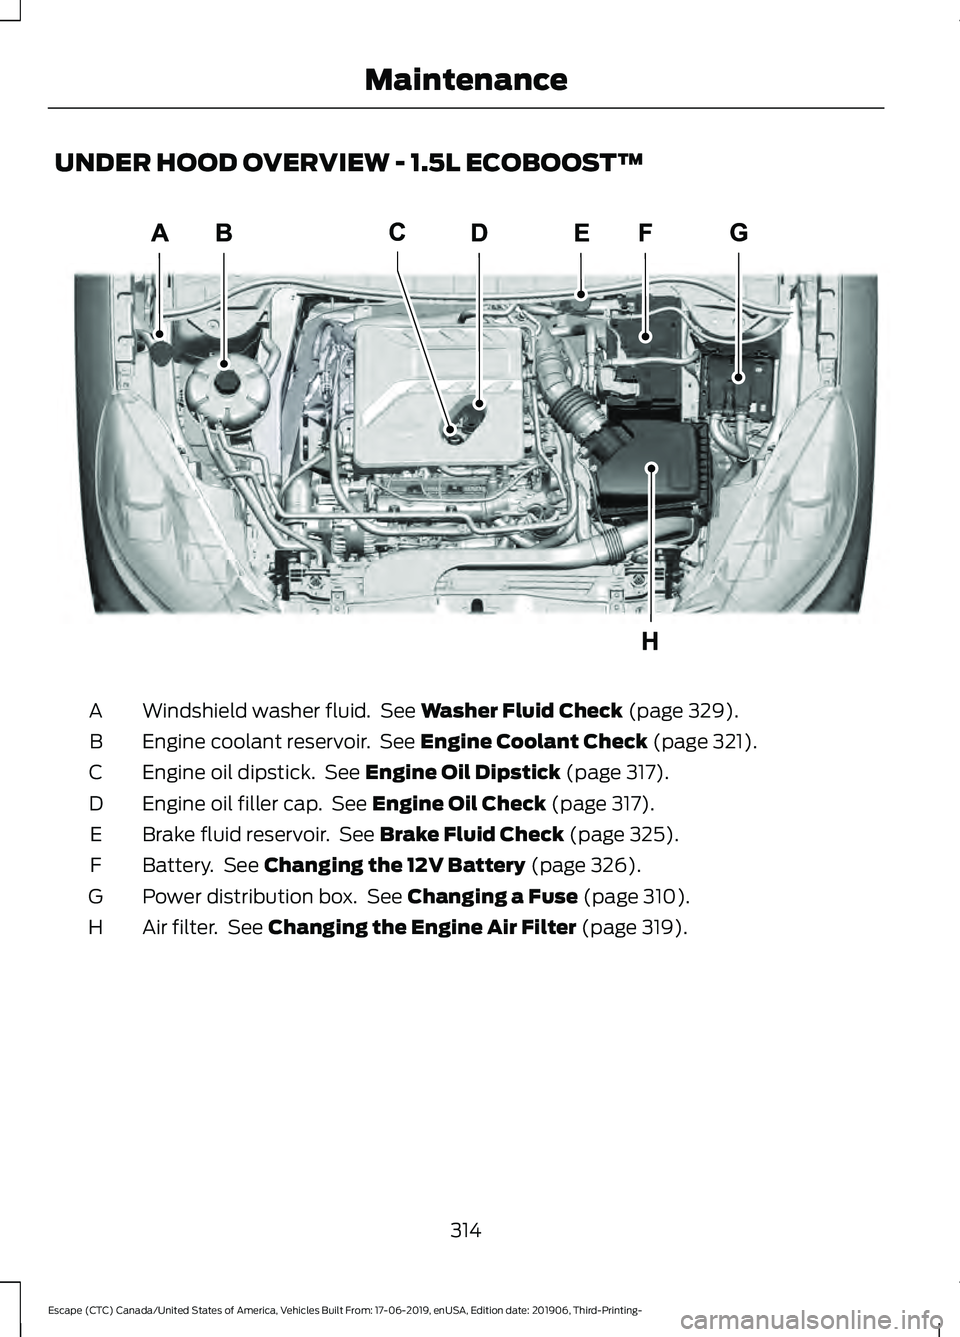 FORD ESCAPE 2020  Owners Manual UNDER HOOD OVERVIEW - 1.5L ECOBOOST™
Windshield washer fluid.  See Washer Fluid Check (page 329).
A
Engine coolant reservoir.  See 
Engine Coolant Check (page 321).
B
Engine oil dipstick.  See 
Engi